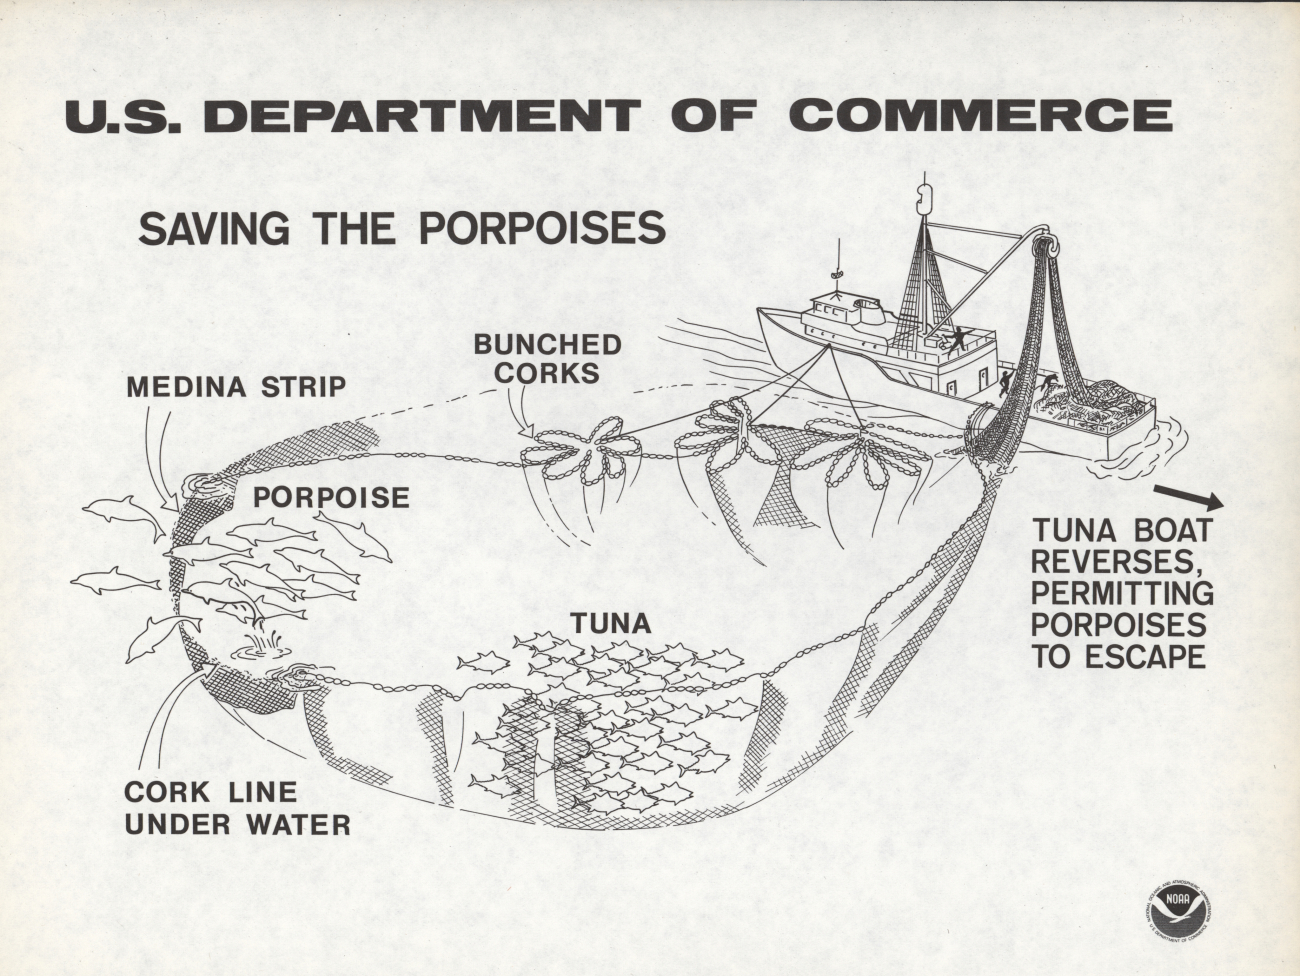 Diagram of backing down process, a maneuver designed to allow porpoise toescape from the tuna purse seine